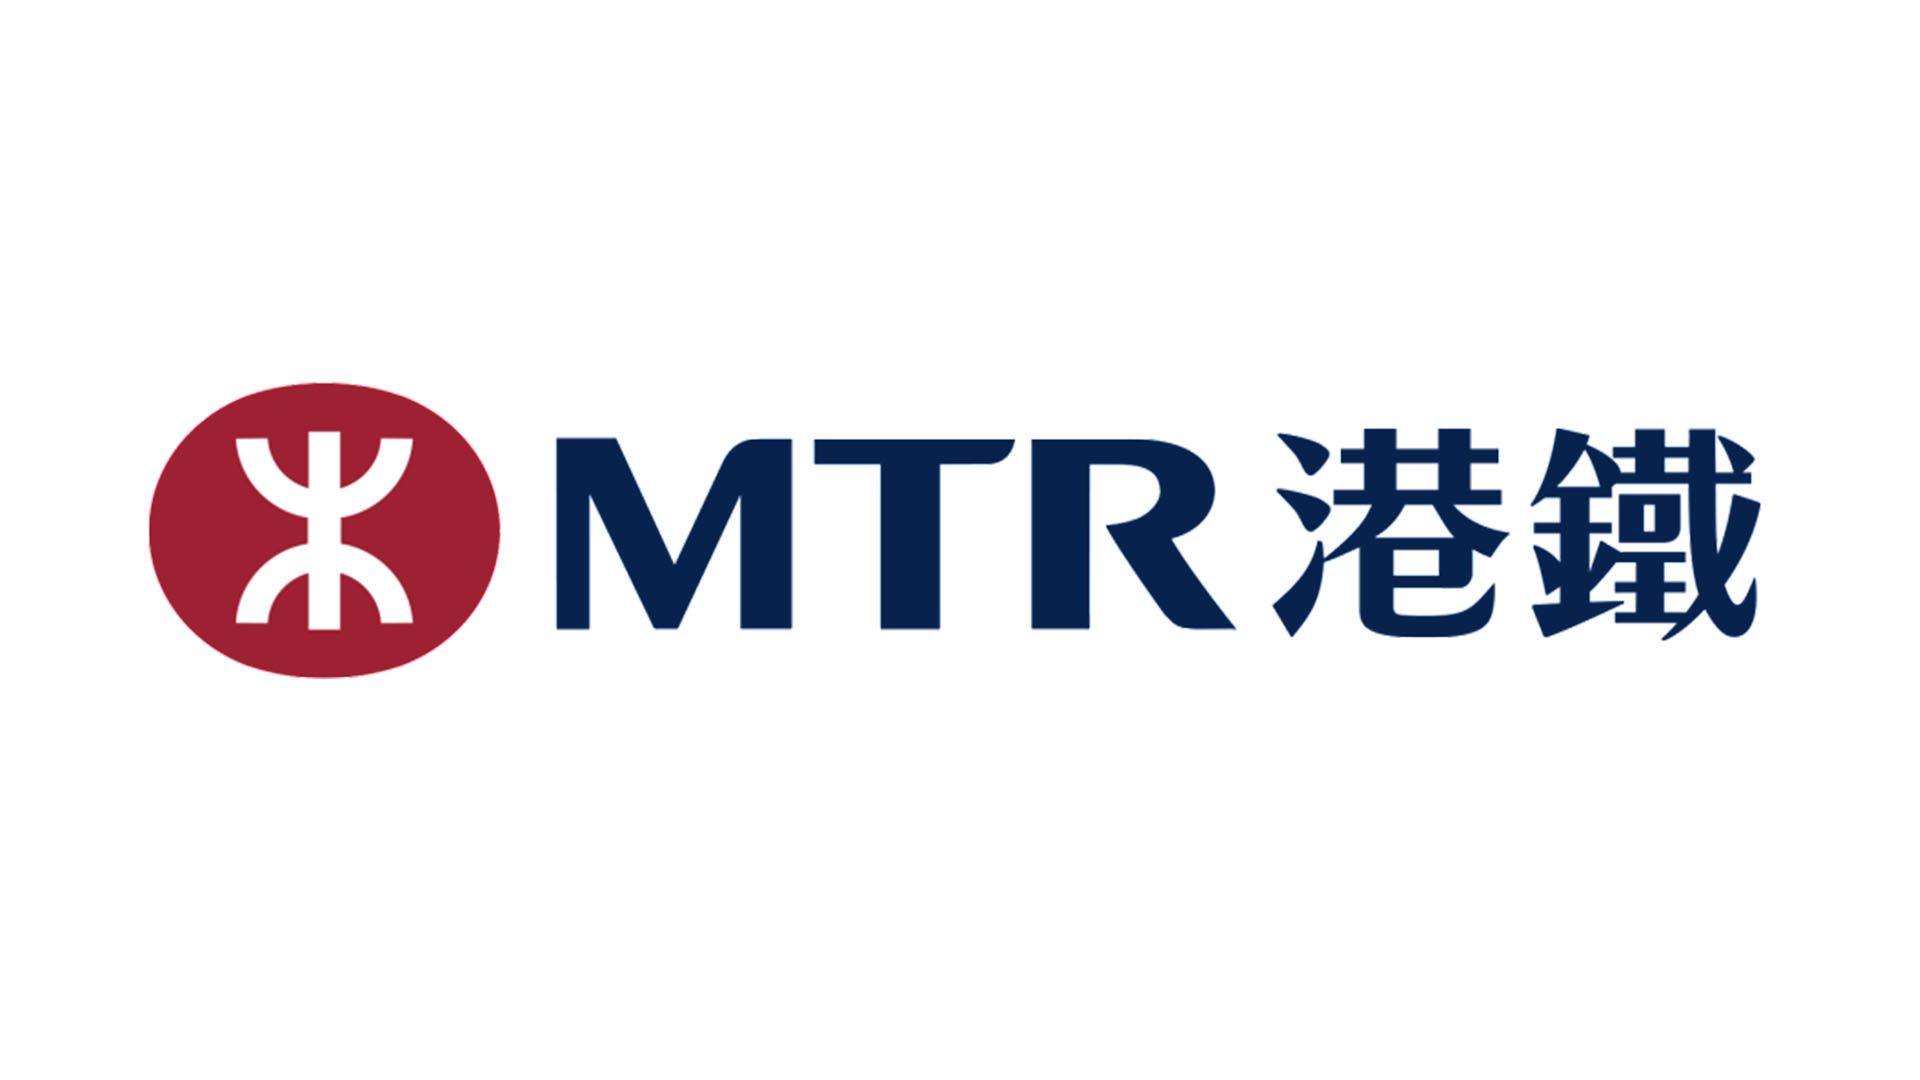 MTR Corporation Limited